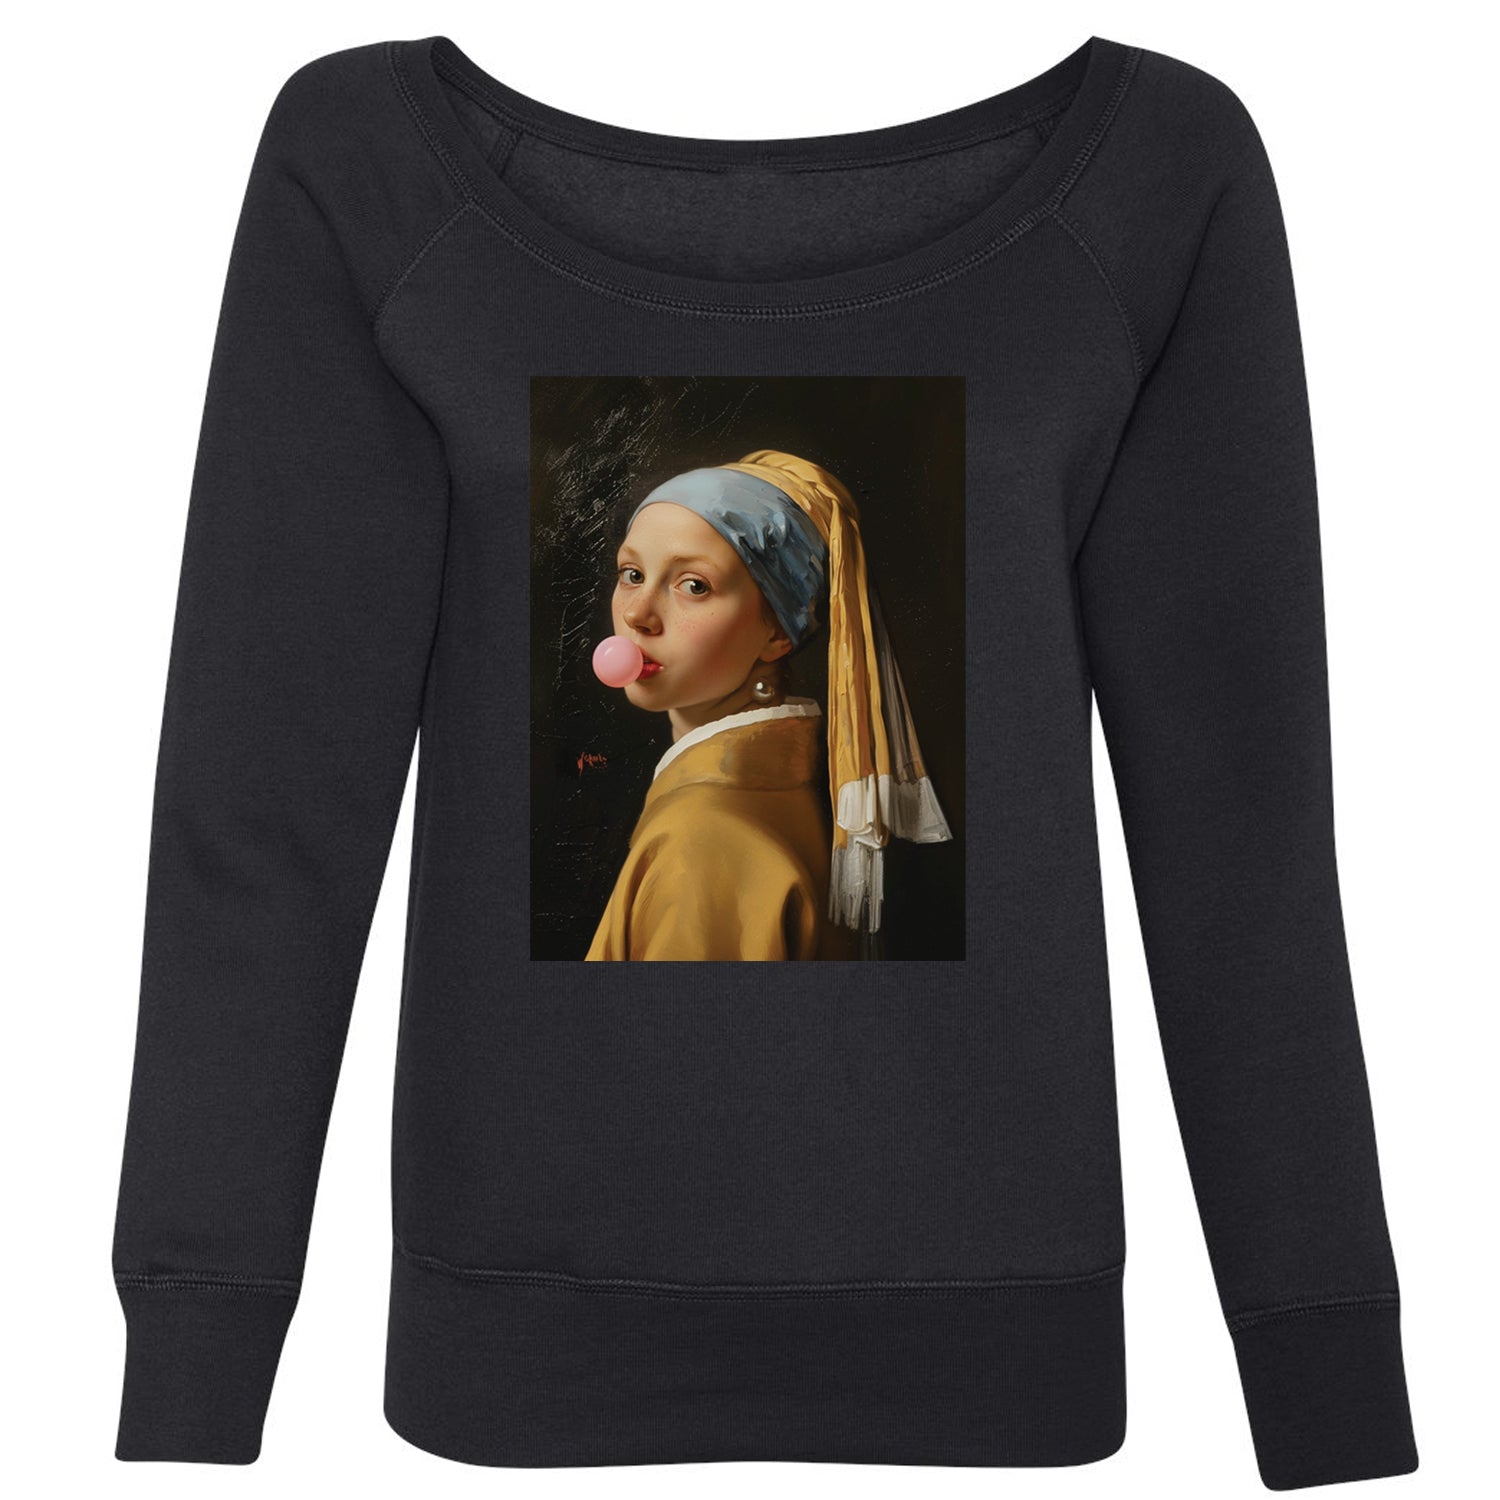 Girl with a Pearl Earring Bubble Gum Contemporary Art Slouchy Off Shoulder Oversized Sweatshirt